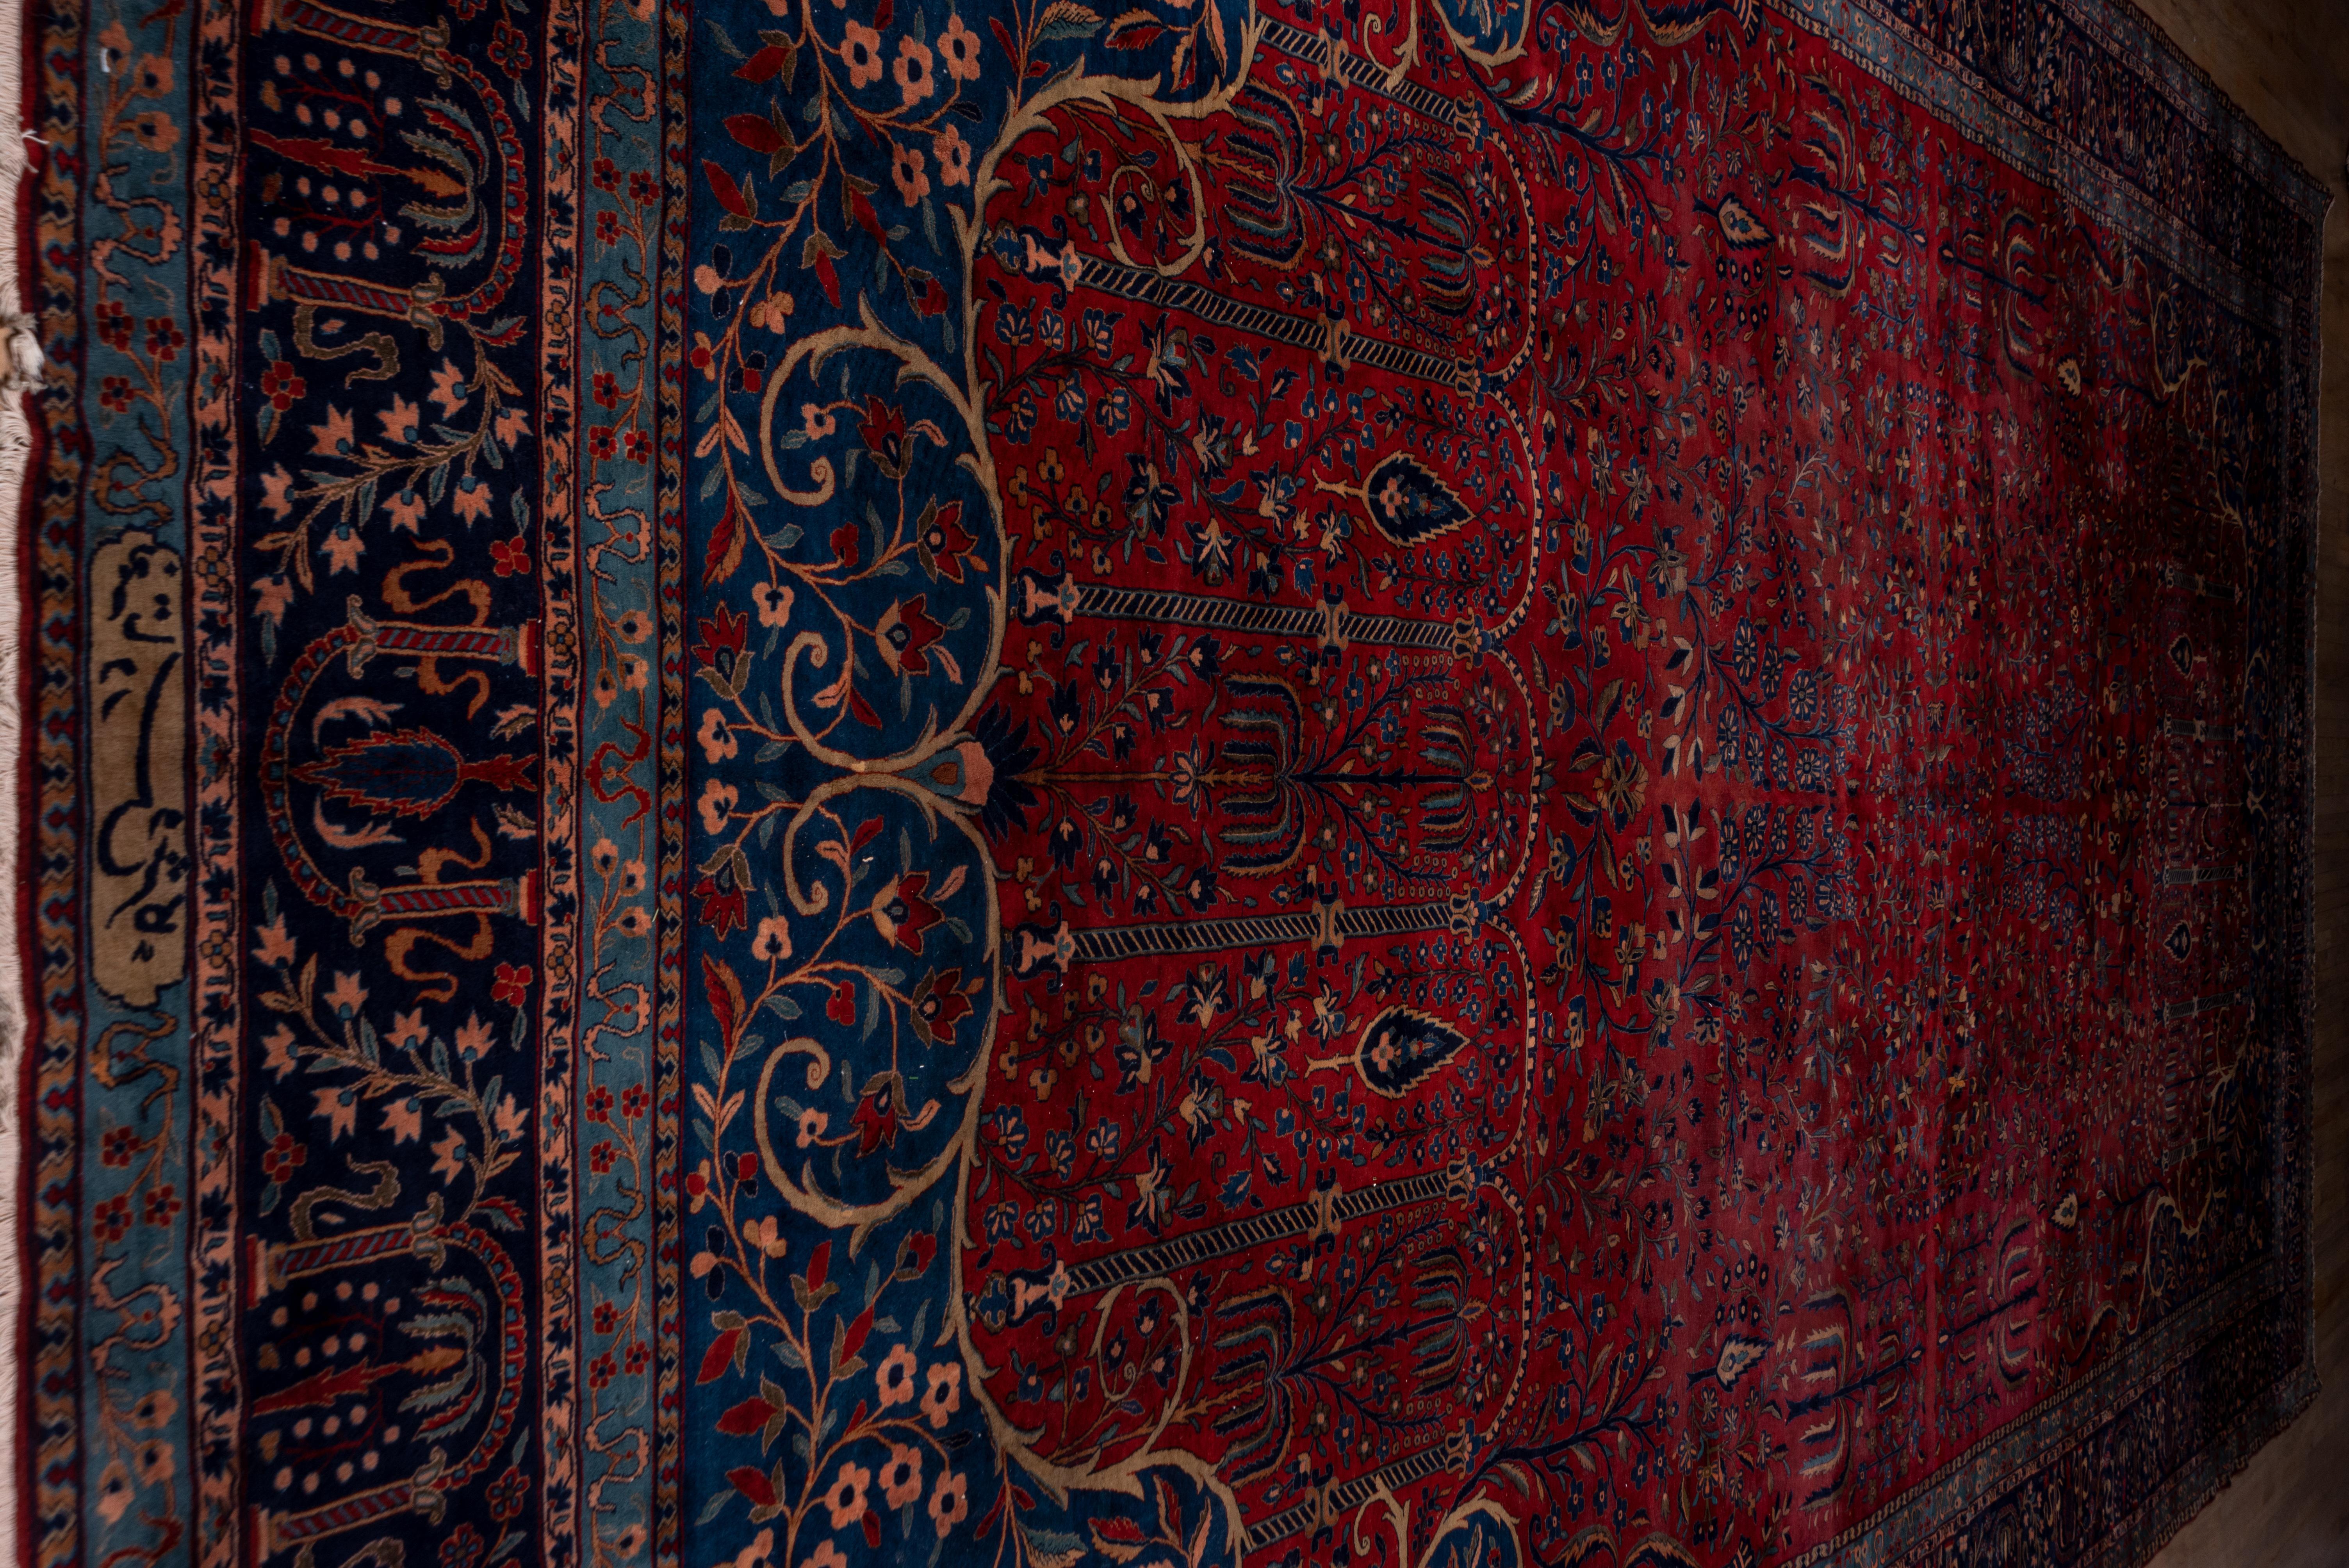 This is an attractive example of the interwar Manchester merino wool Kashan carpets with ruby red fields and a floral pattern influenced by 